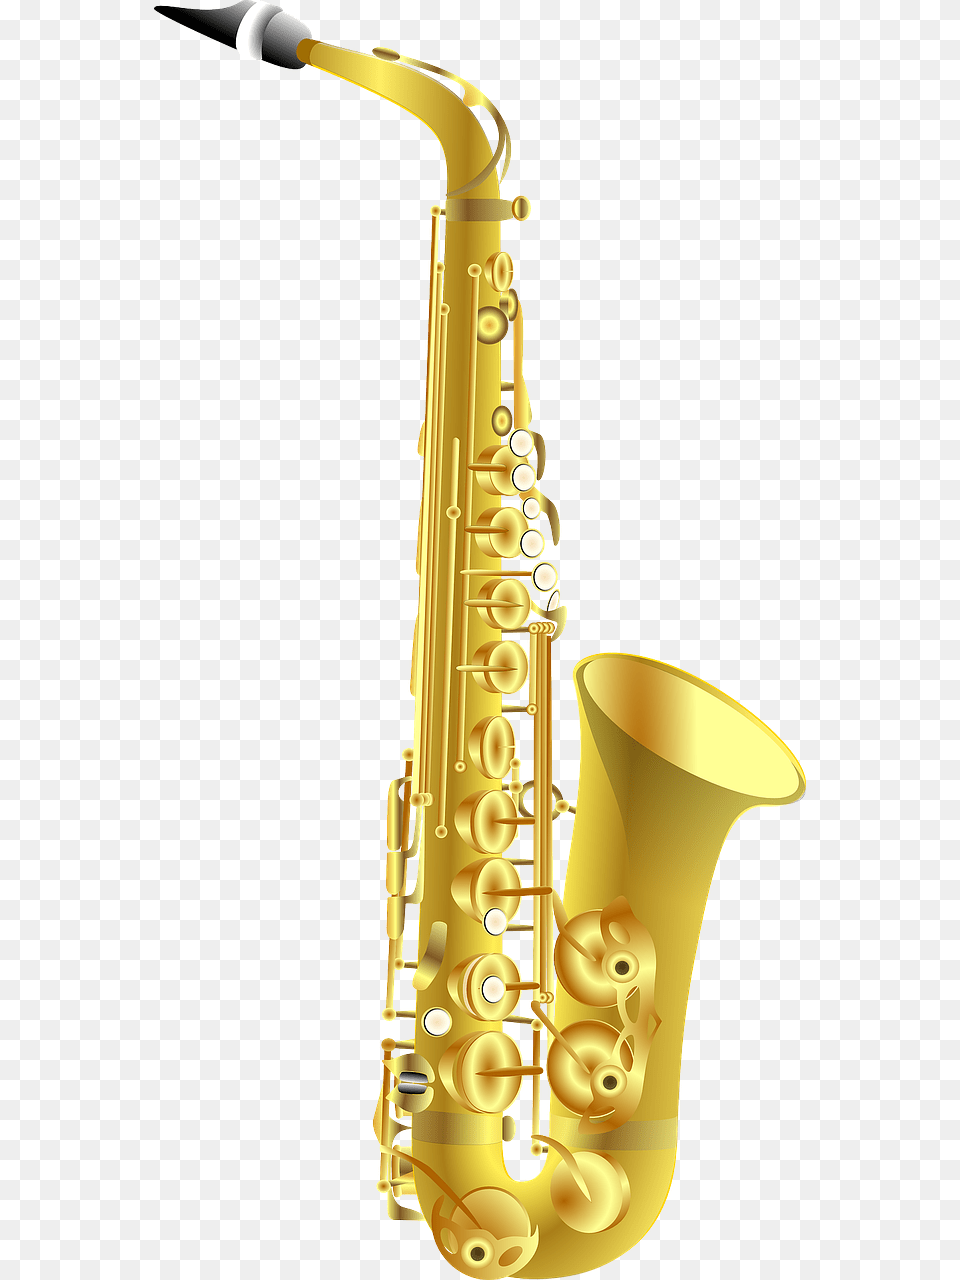 Background Saxophone Transparent Trumpet Sax, Musical Instrument, Smoke Pipe Png